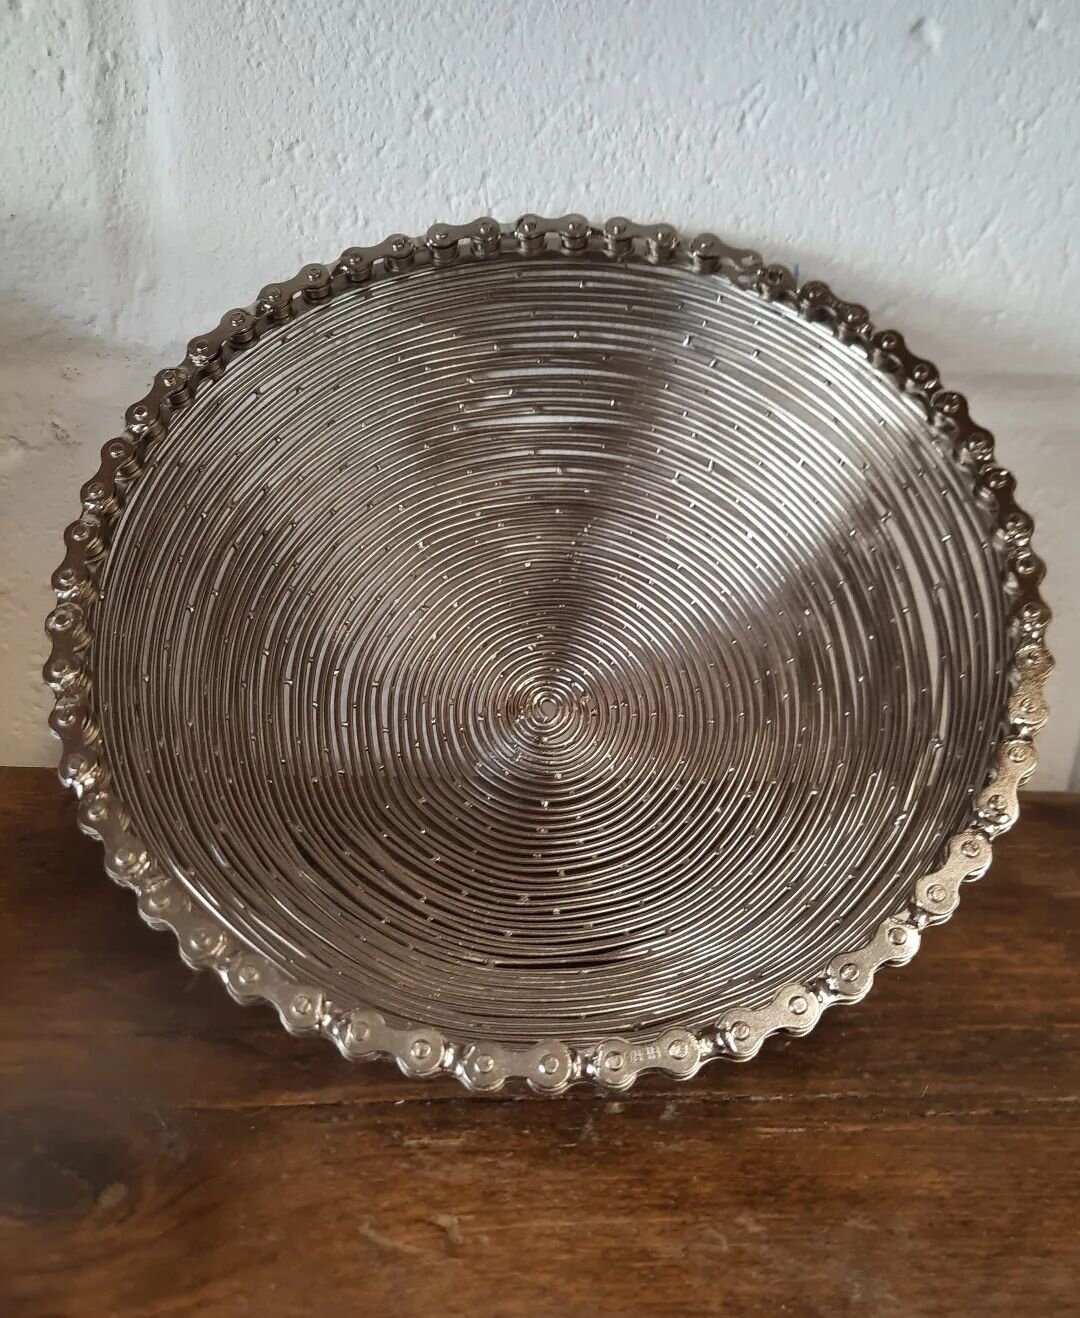 Silver bowl made from old 🚲. Made in India part of the fair trade range. 
#bicycle 
#bikechain
#recycledbikeparts 
#madeinindia 
#fairtradegift 
#woodstreetcommunity 
#walthamstowvilliage 
#London
#E17